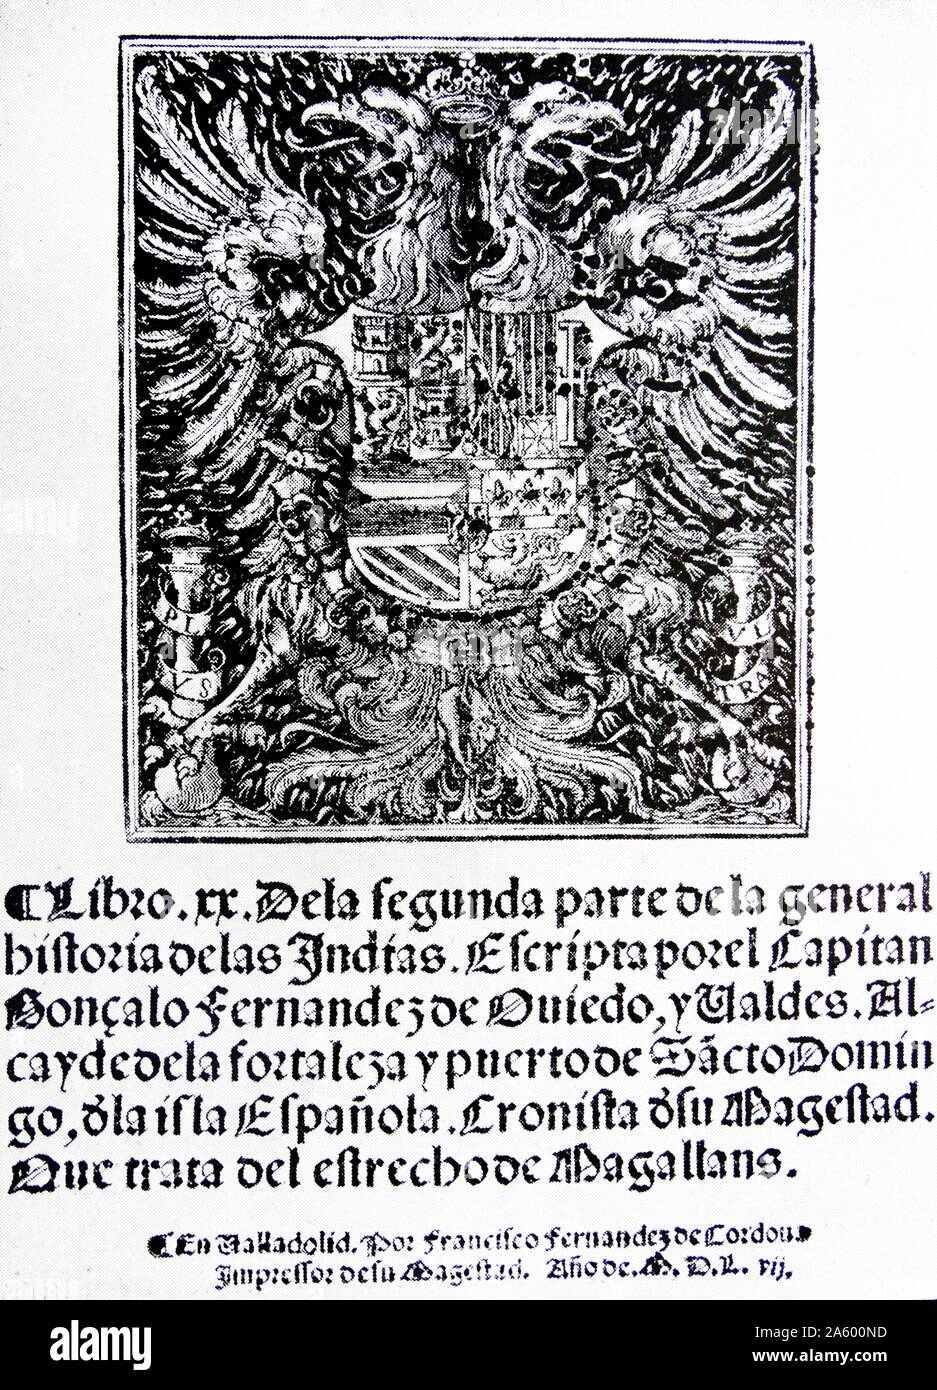 Volume II of Natural Historia de las Indias (1526); by Gonzalo Fernández de Oviedo (August 1478 – 1557). Spanish historian and writer. He is commonly known as 'Oviedo' even though his family name is Fernández. He participated in the Spanish colonization of the Caribbean; and wrote a long chronicle of this project which is one of the few primary sources about it. Stock Photo